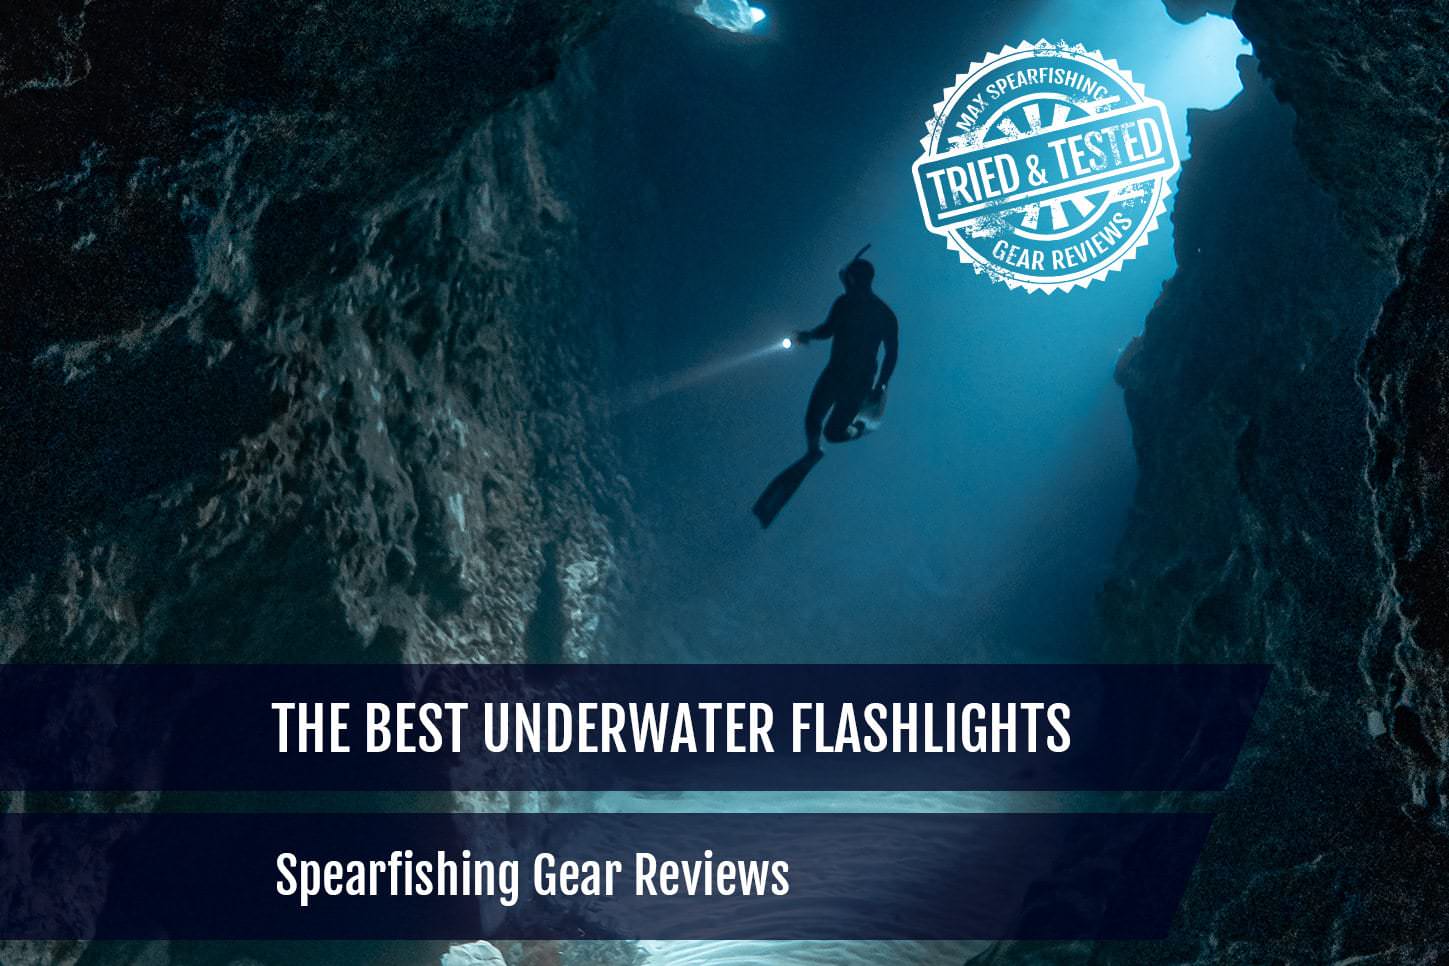 The Best Underwater Flashlights For Spearfishing